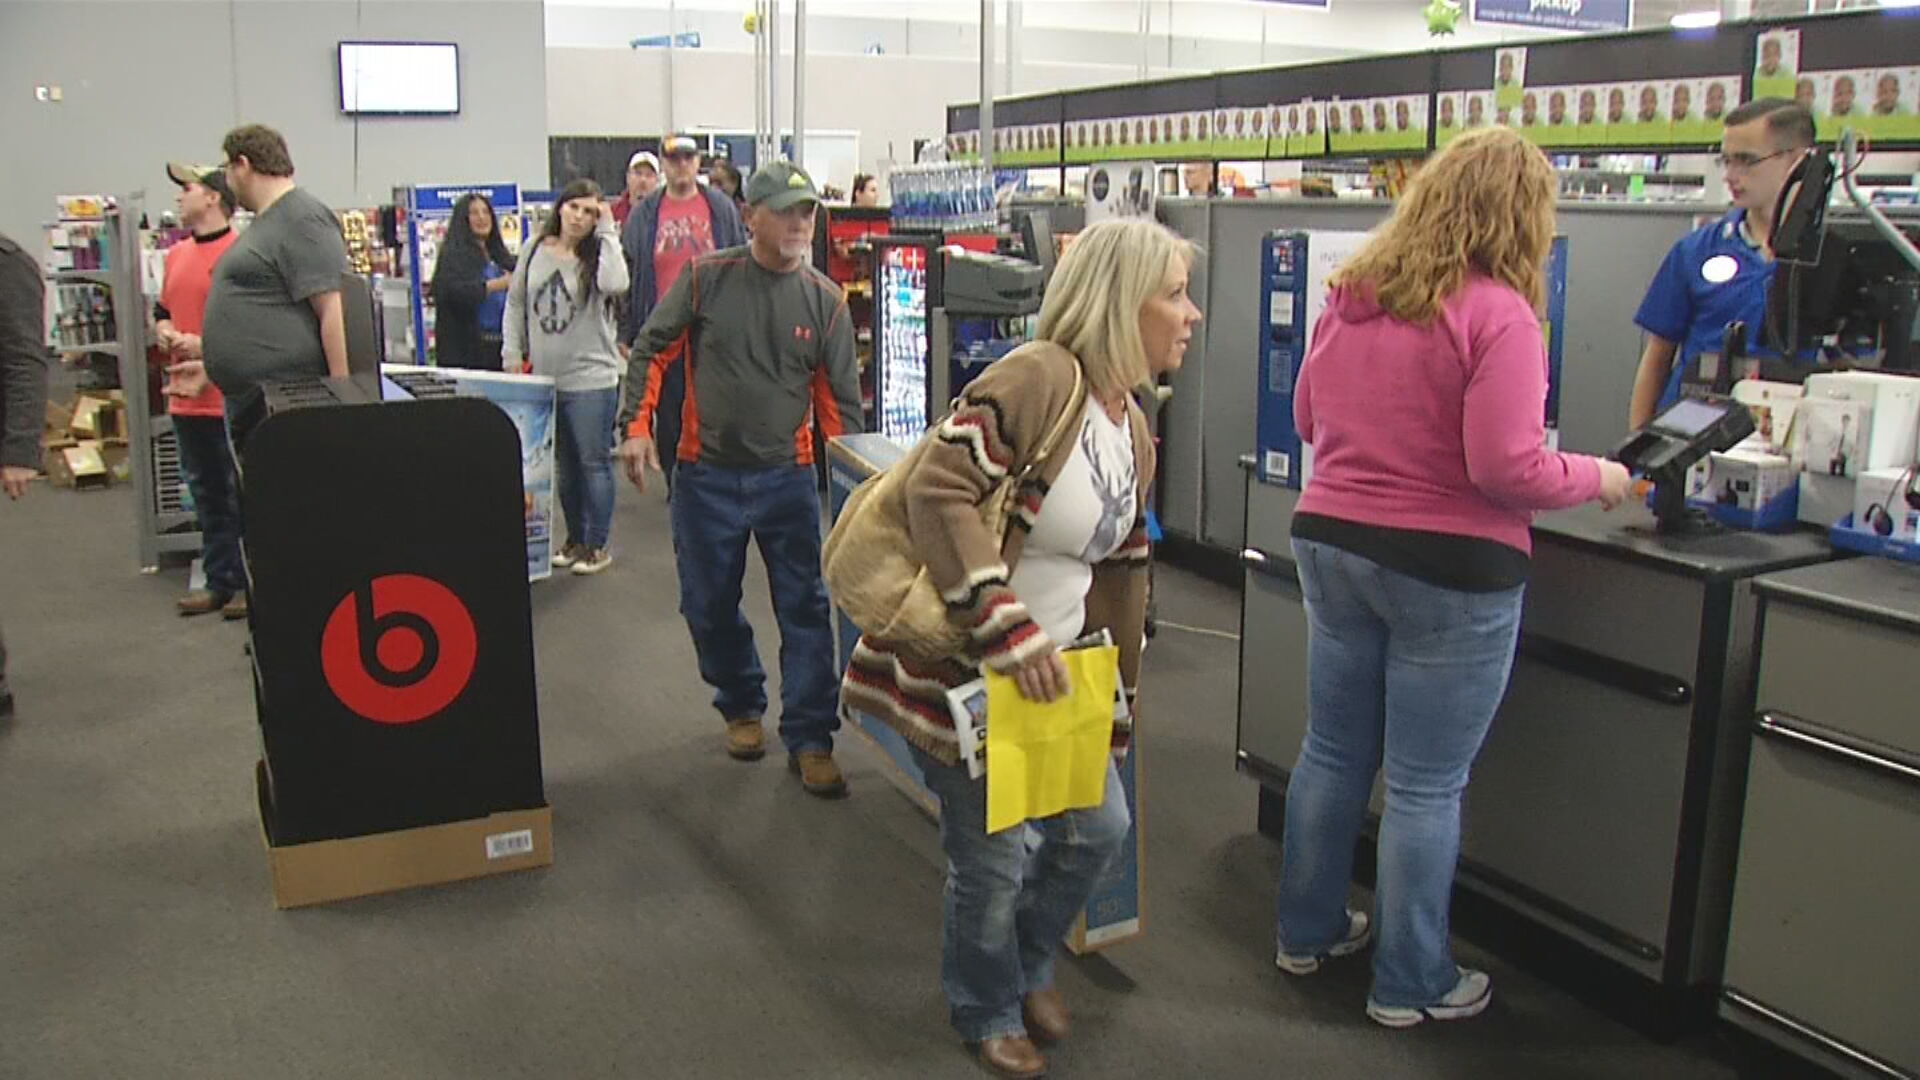 Tips From Tulsa Police To Stay Safe While Holiday Shopping